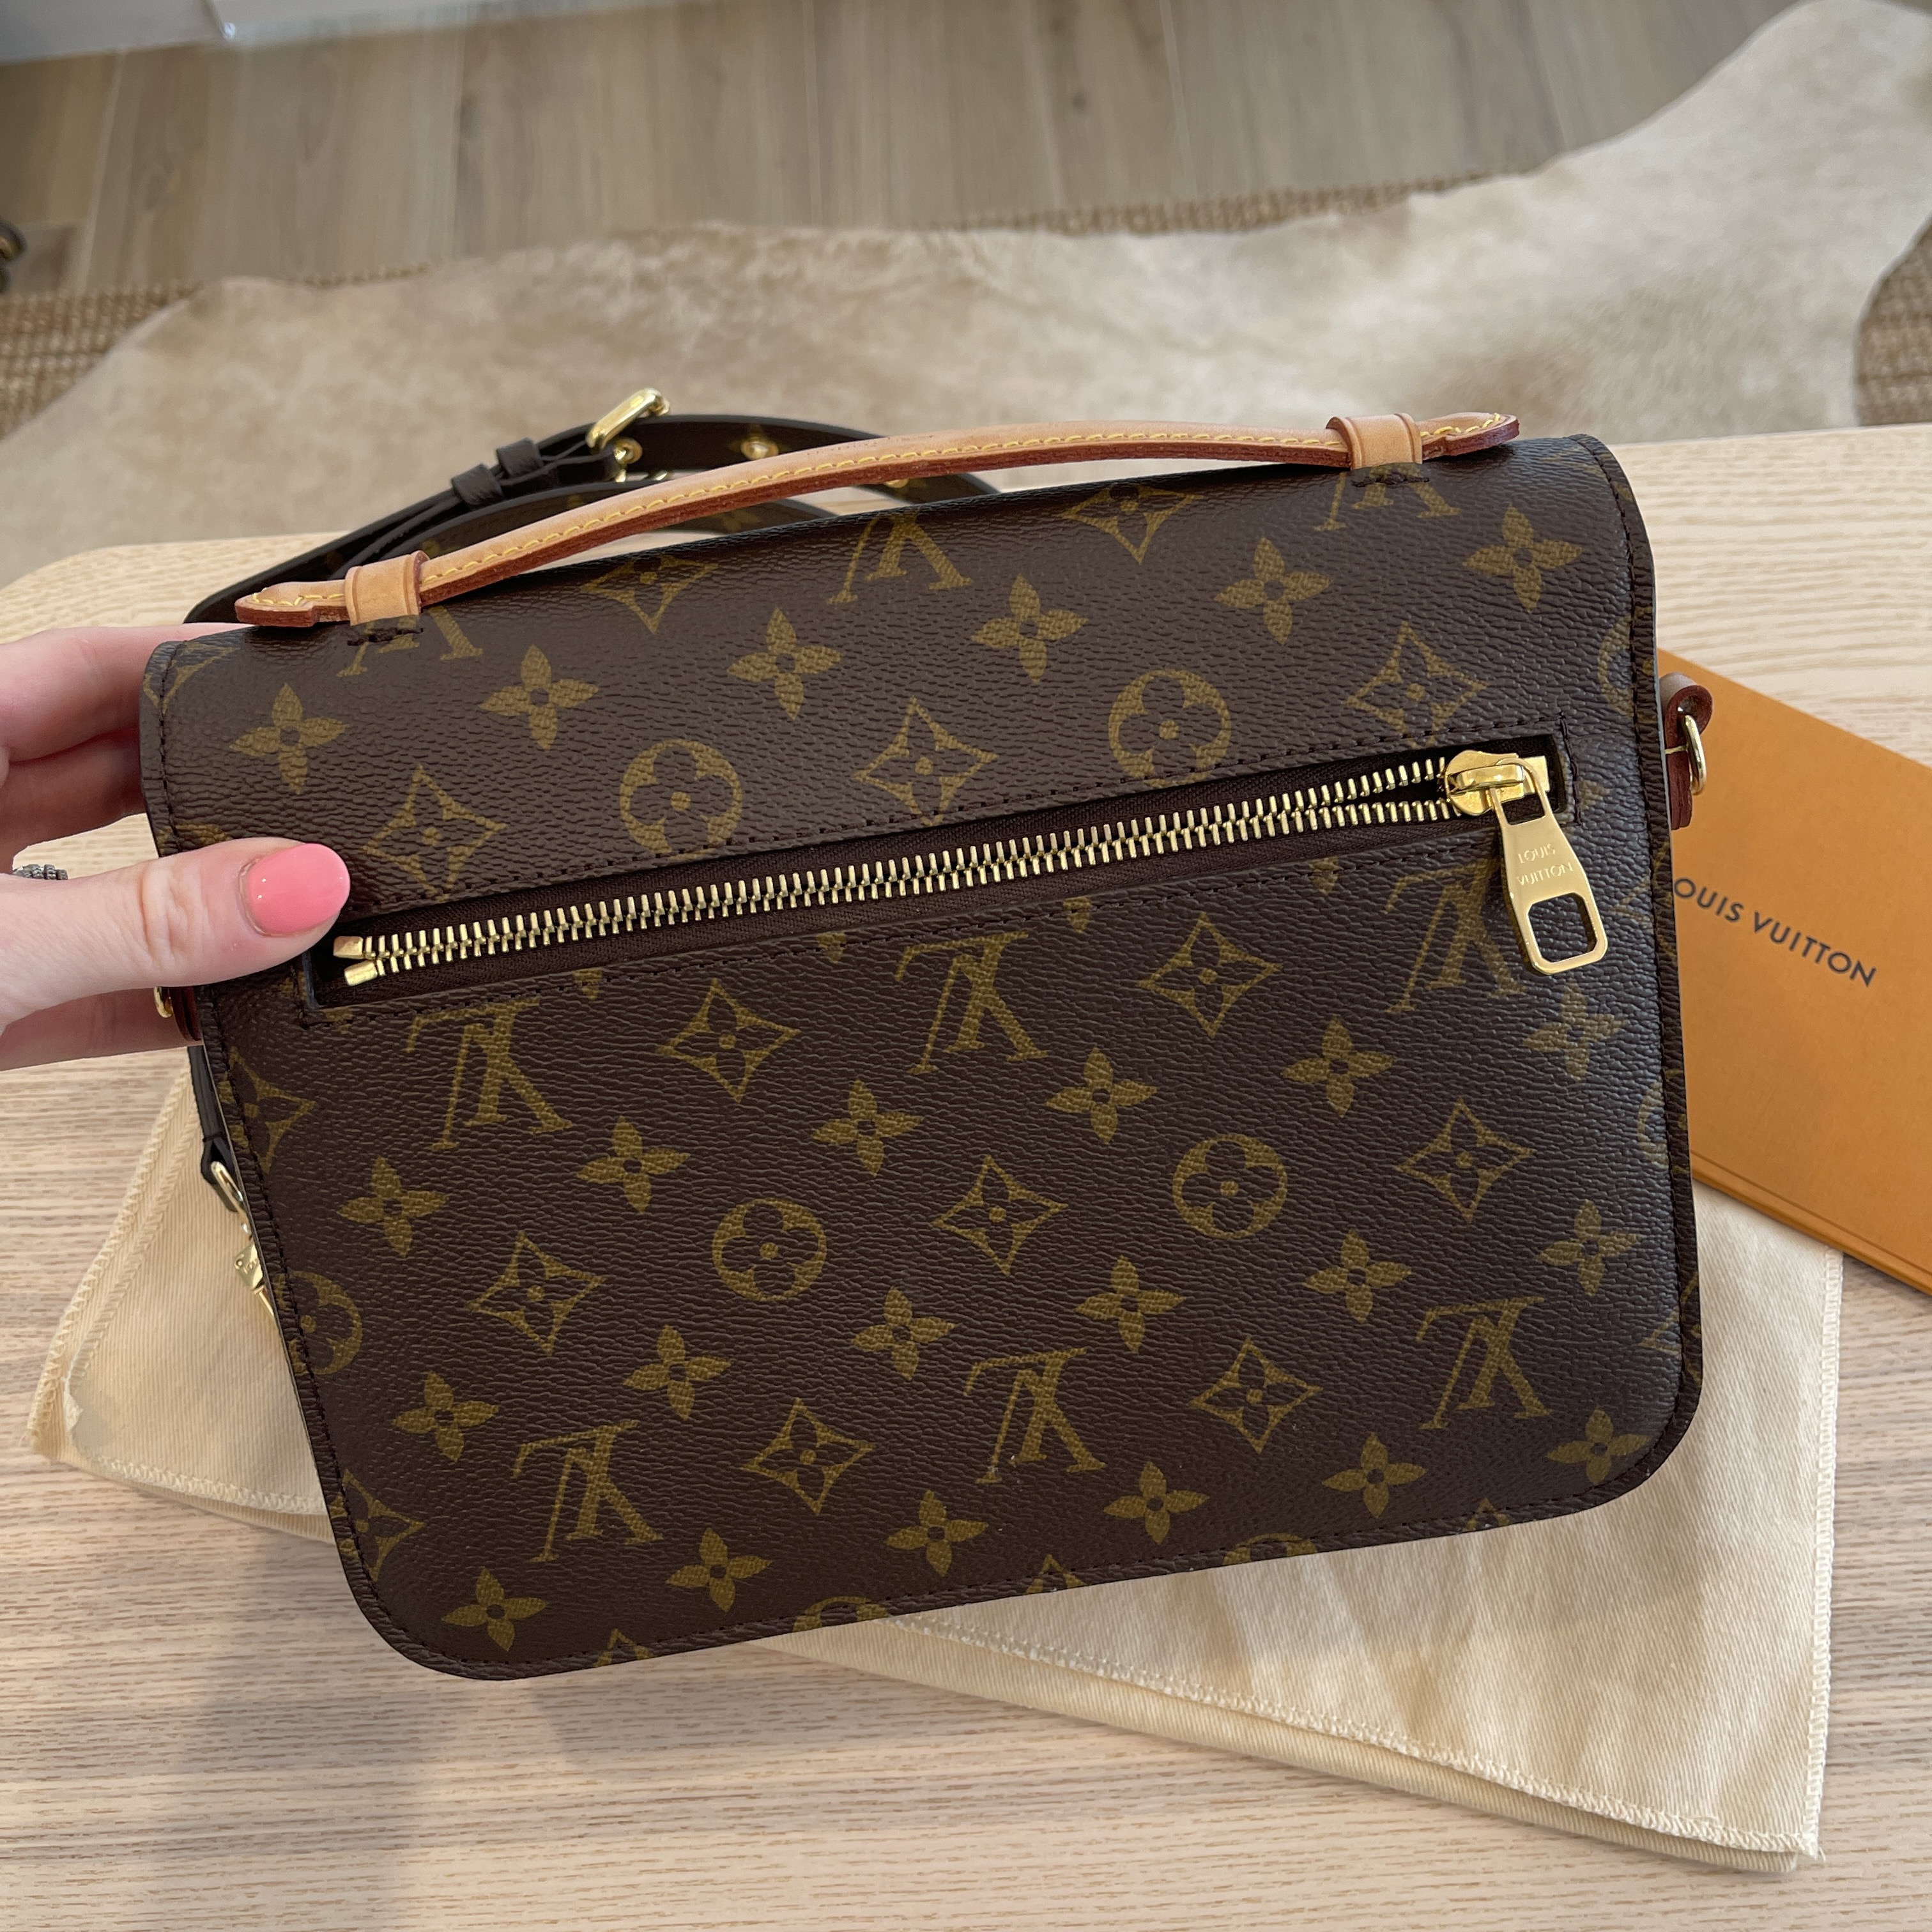 Louis Vuitton Pochette Metis Black . Receipt in hand Bag Specifications 9.8  x7.5 x 2.8 inches ( Length x Height x width ) Strap drop 18” Strap drop for  Sale in Las Vegas, NV - OfferUp